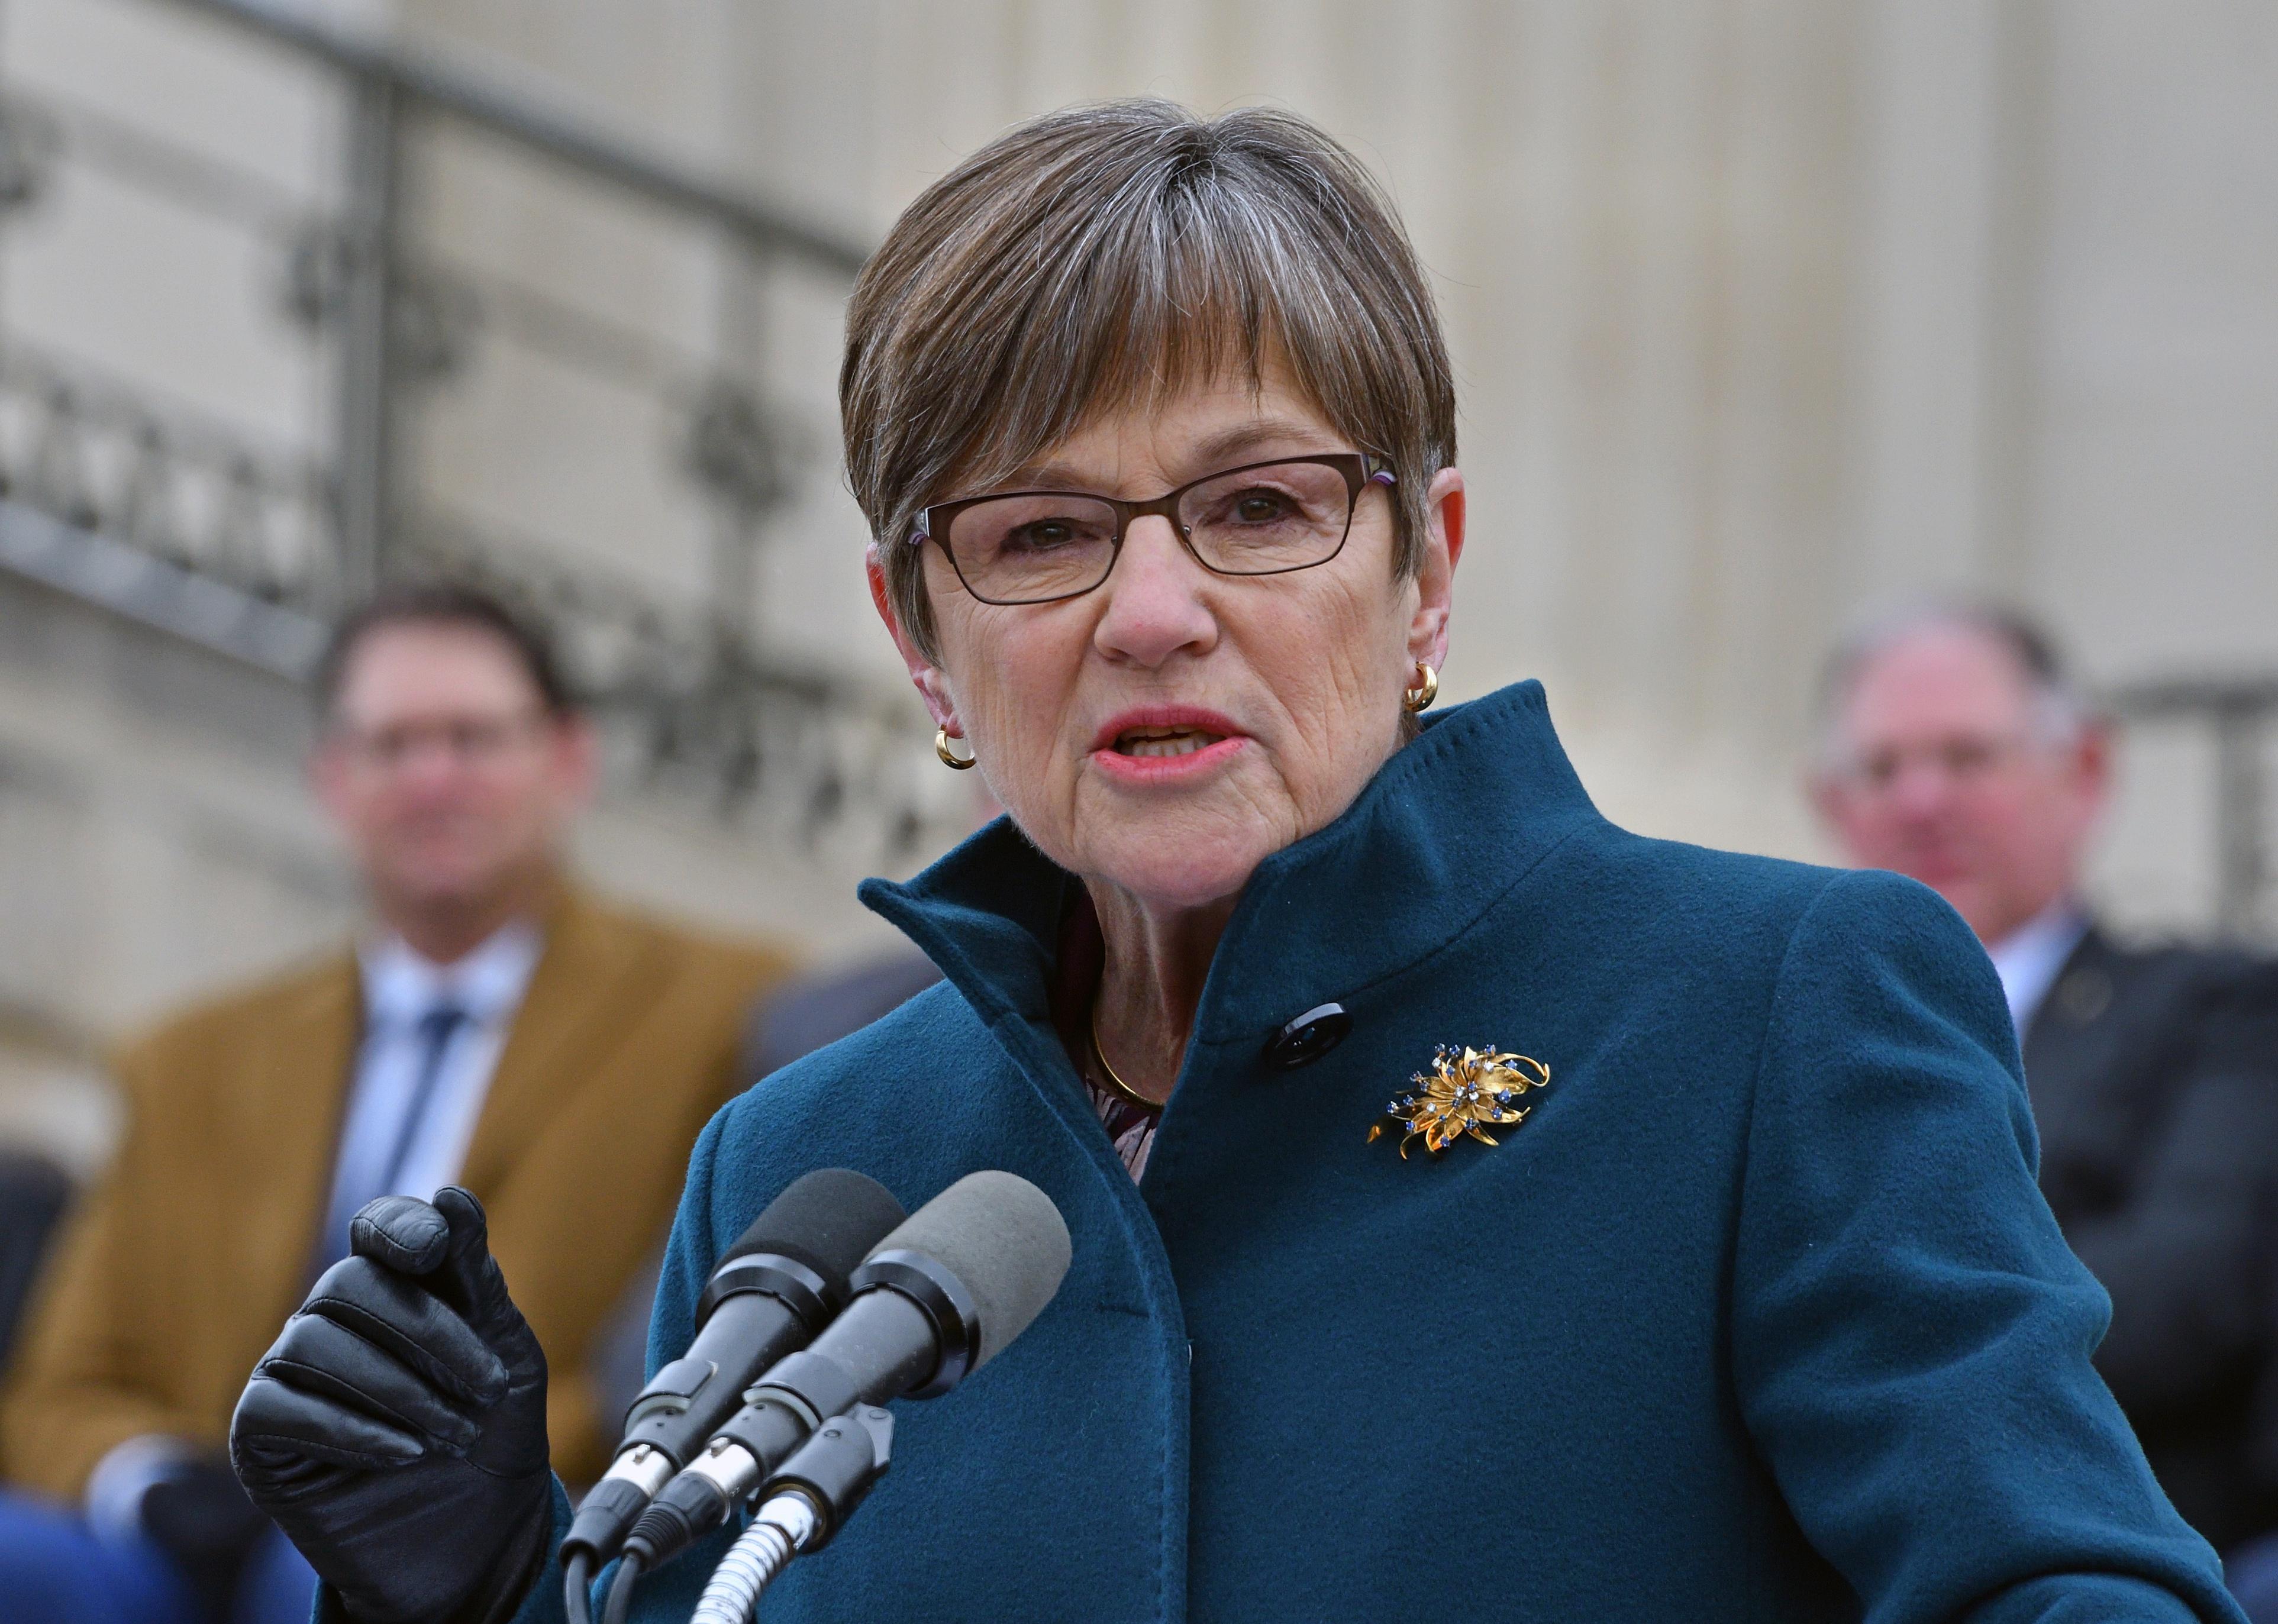 Kansas Governor Laura Kelly delivers her inaugural speech